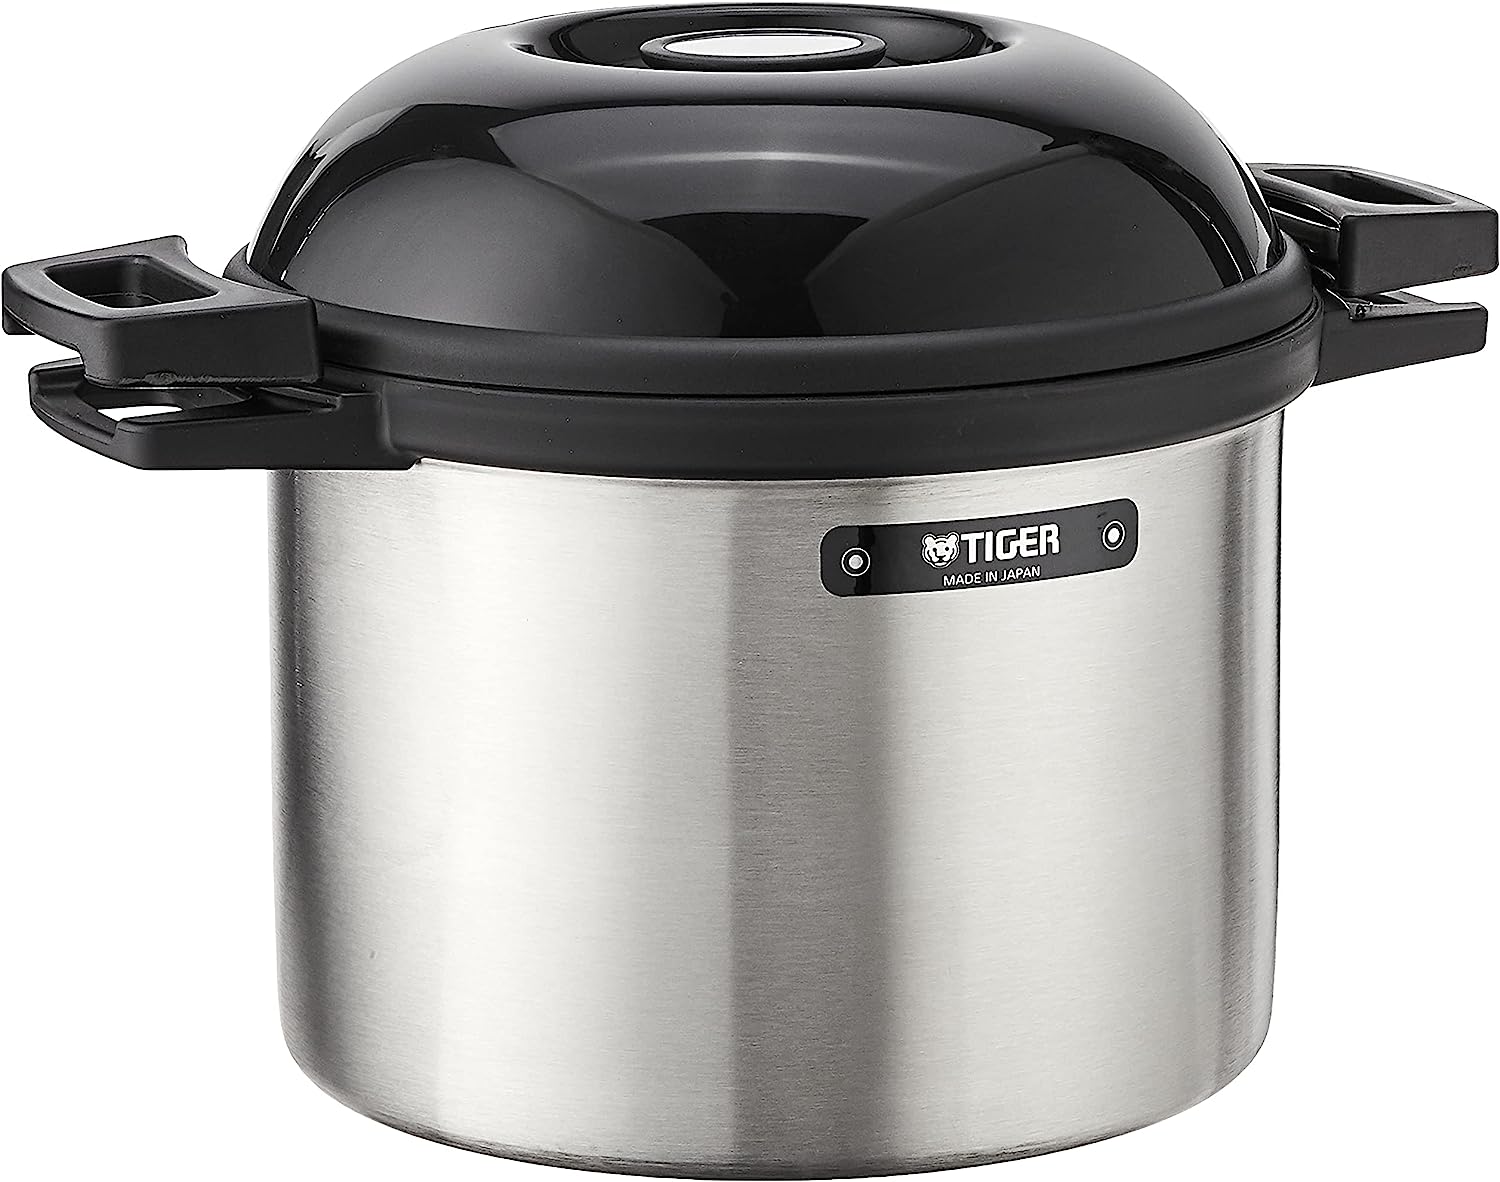 Tiger Non-Electric Thermal Slow Cooker, 4.5 Liters